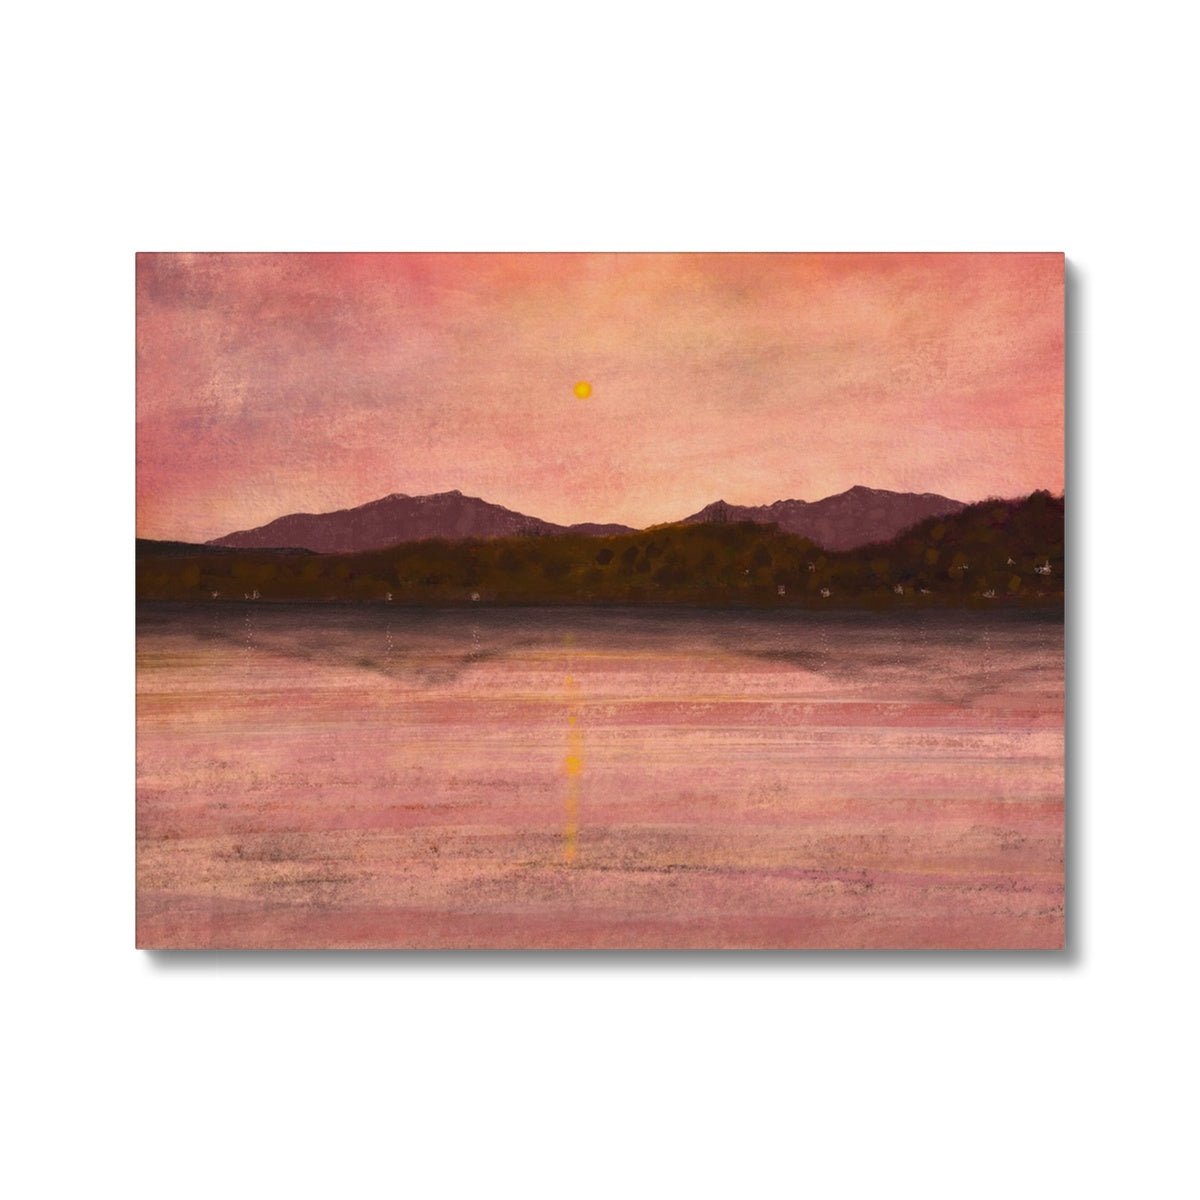 Dusk Over Arran & Bute Painting | Canvas From Scotland-Contemporary Stretched Canvas Prints-Arran Art Gallery-24"x18"-Paintings, Prints, Homeware, Art Gifts From Scotland By Scottish Artist Kevin Hunter